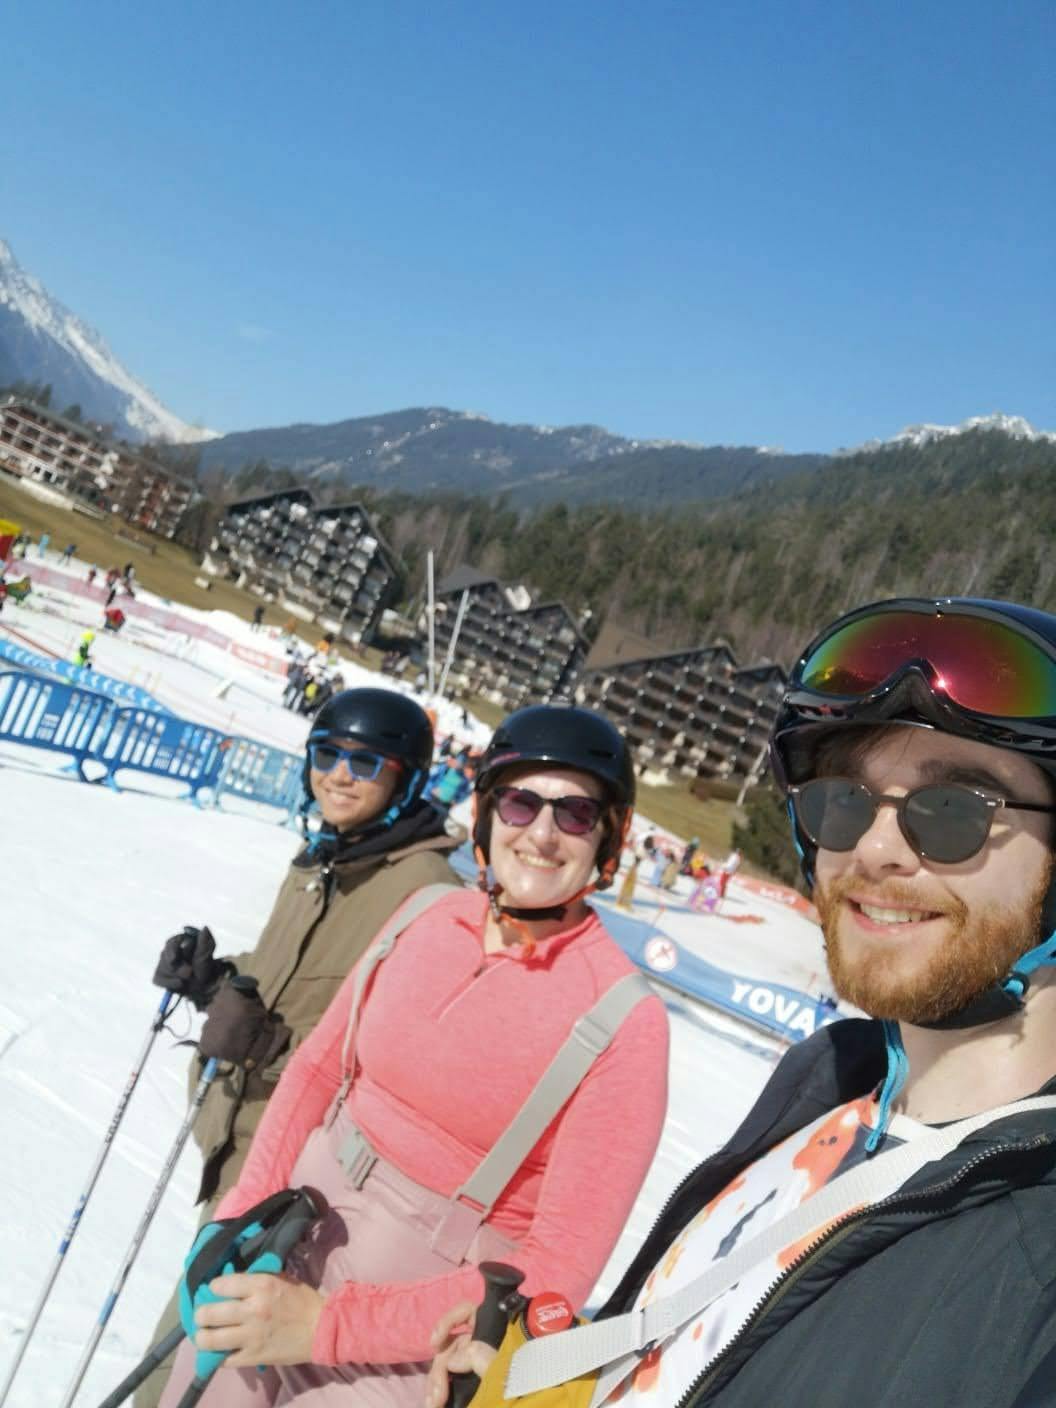 Me, Ester, and Will on the slopes